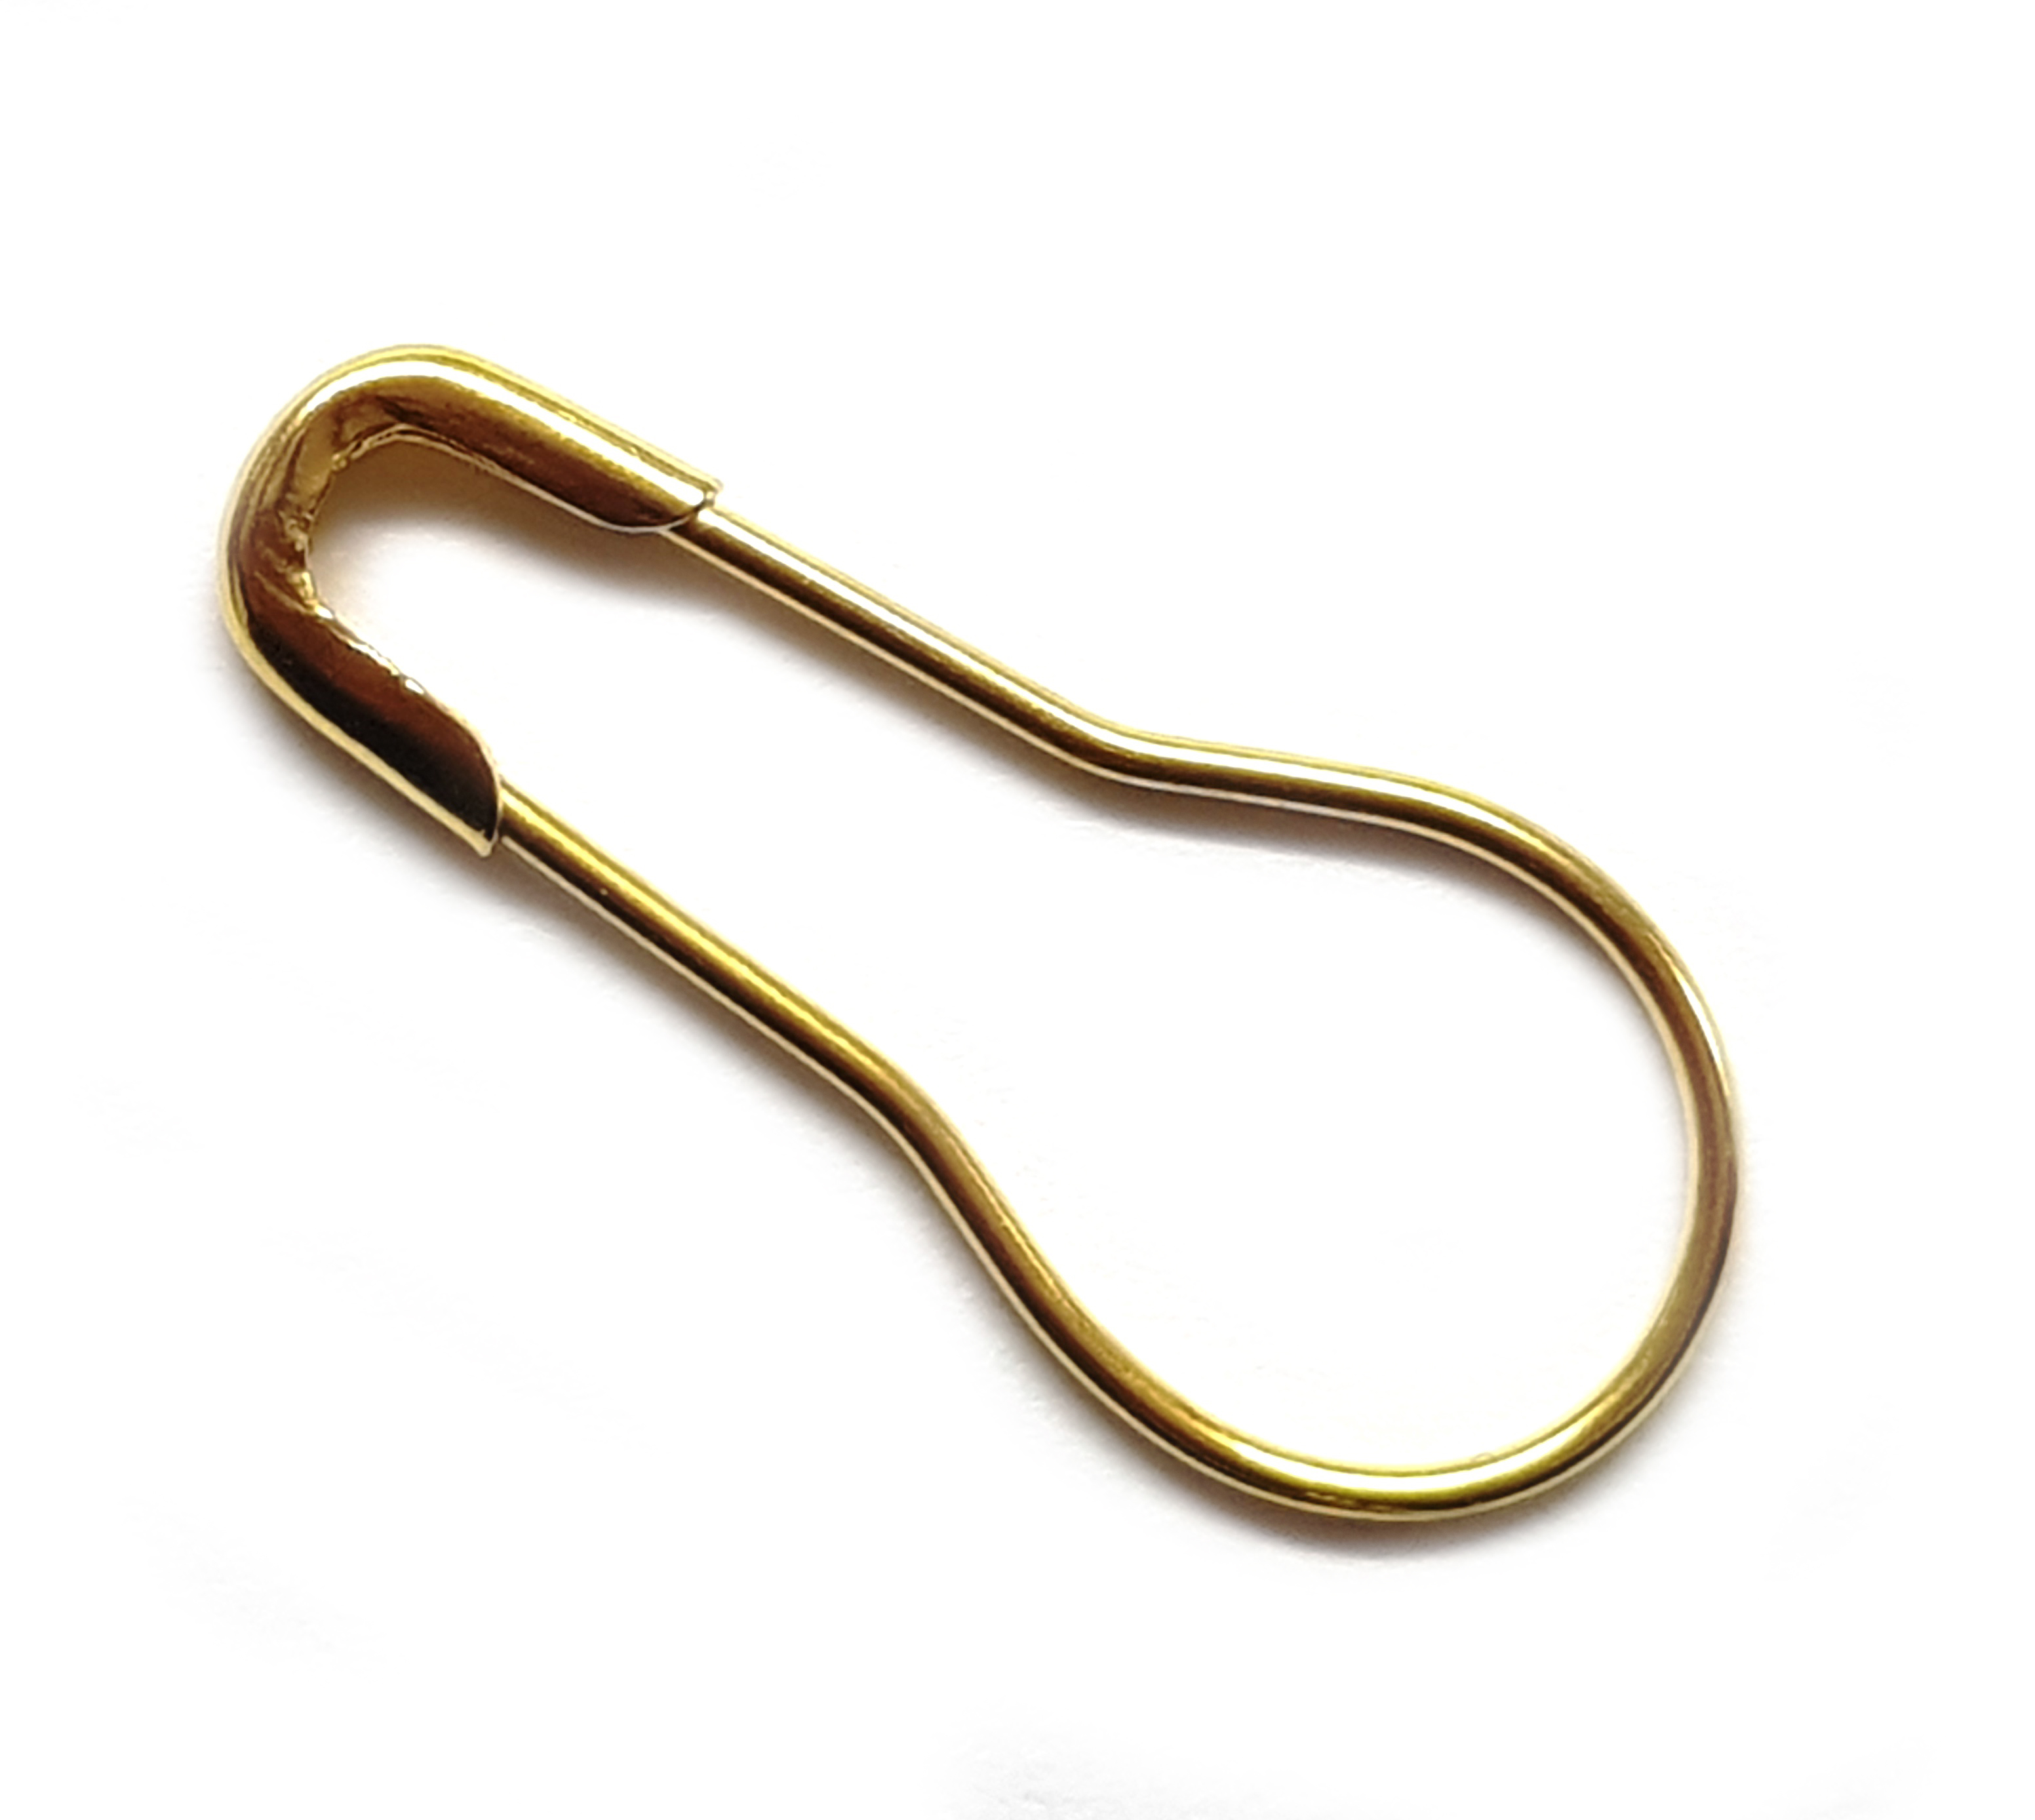 22mm Gold Pear Shaped Safety Pins